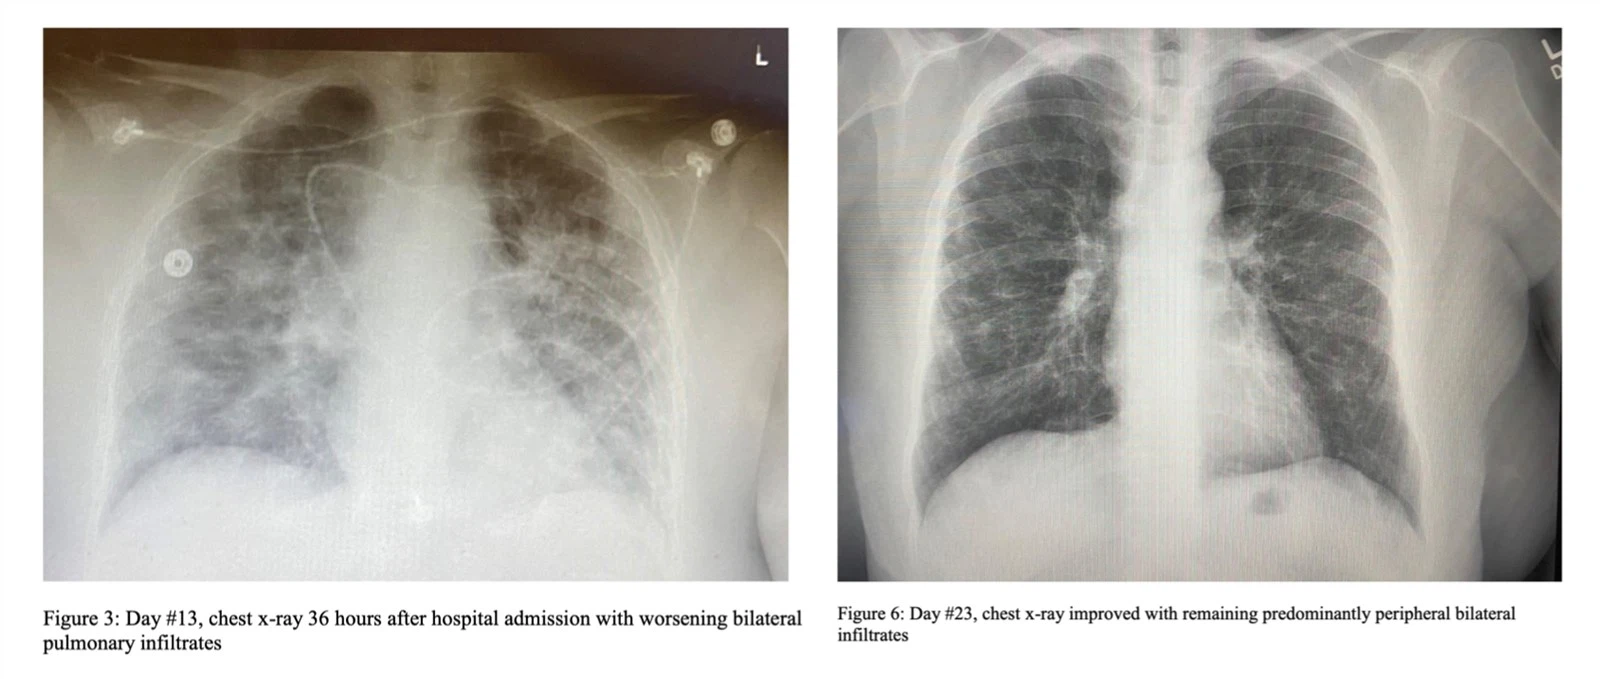 After receiving NMN cocktail therapy (right), the patient's lung condition improved significantly